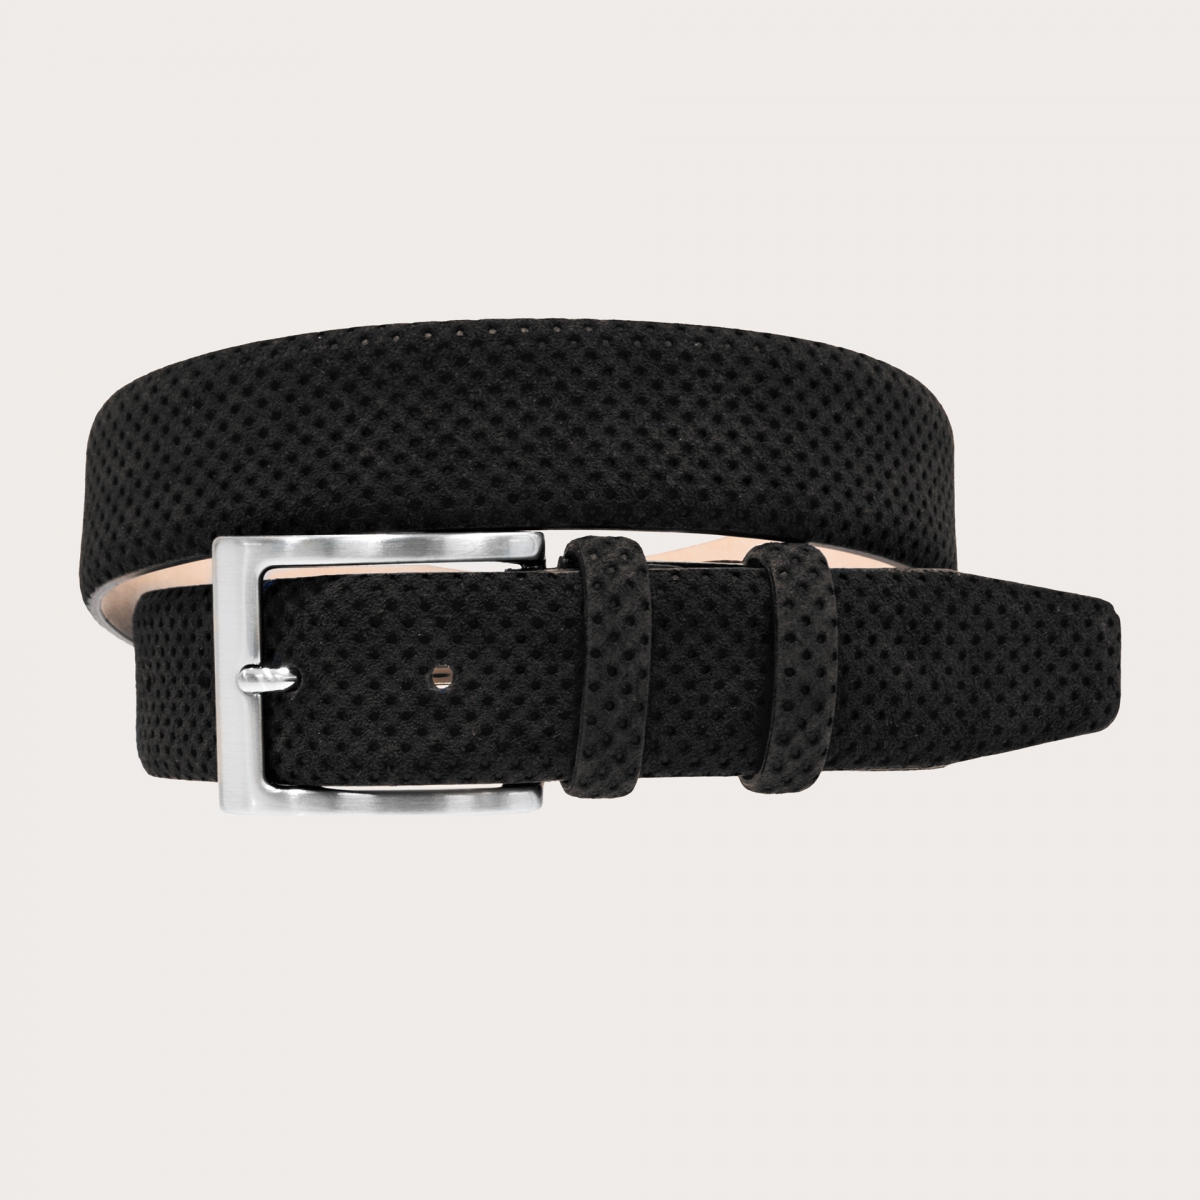 Perforated Black Suede Belt  Handcrafted Elegance Made in Italy